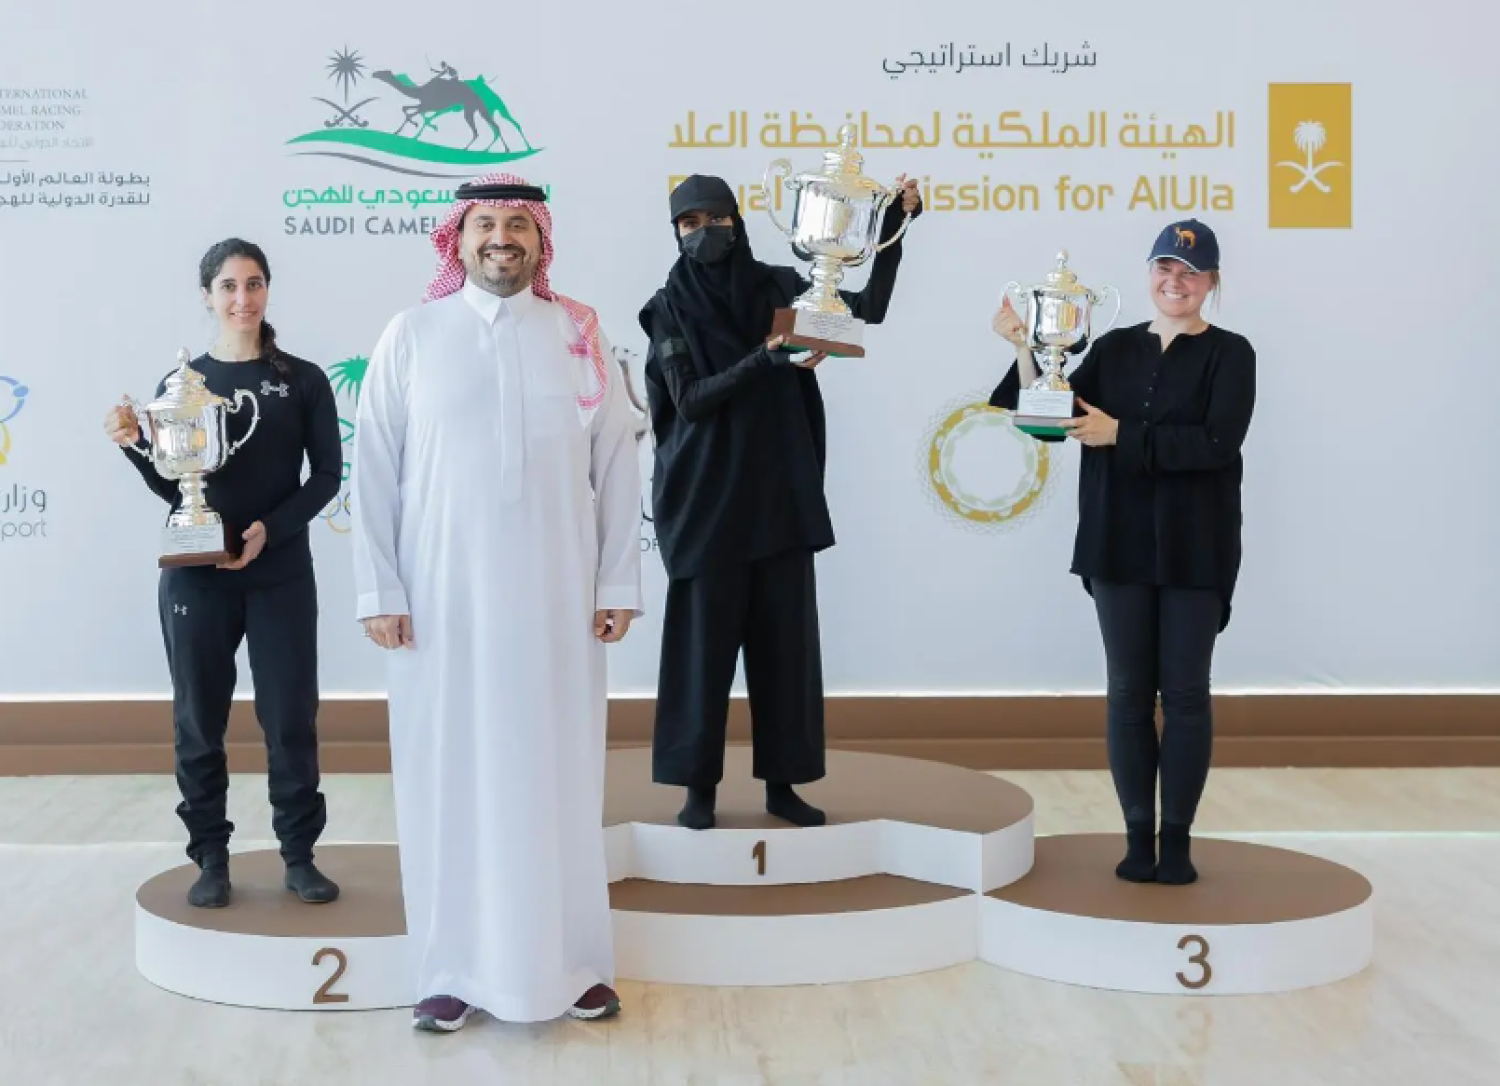 The championship is co-organized by the International Camel Racing Federation and the Royal Commission for AlUA - SPA